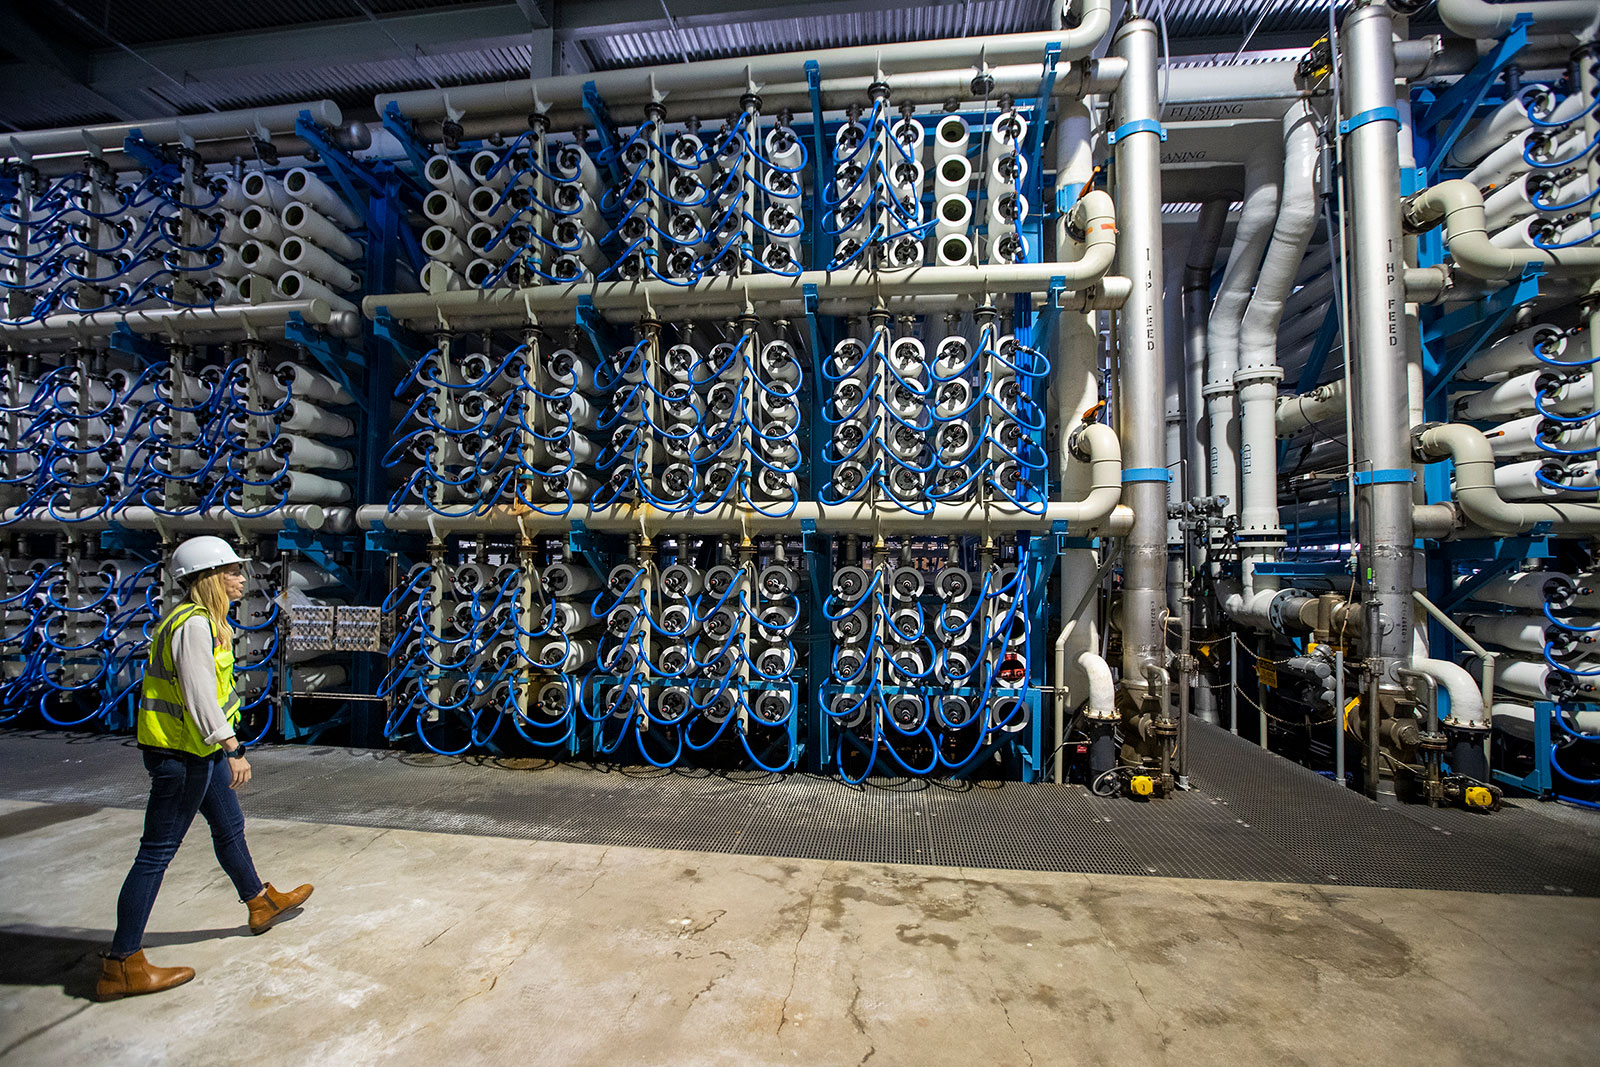 Michelle Peters, technical and compliance manager for Poseidon Water, walks through the reverse osmosis building at the Claude “Bud” Lewis Carlsbad Desalination Plant in Carlsbad, California, on March 30.